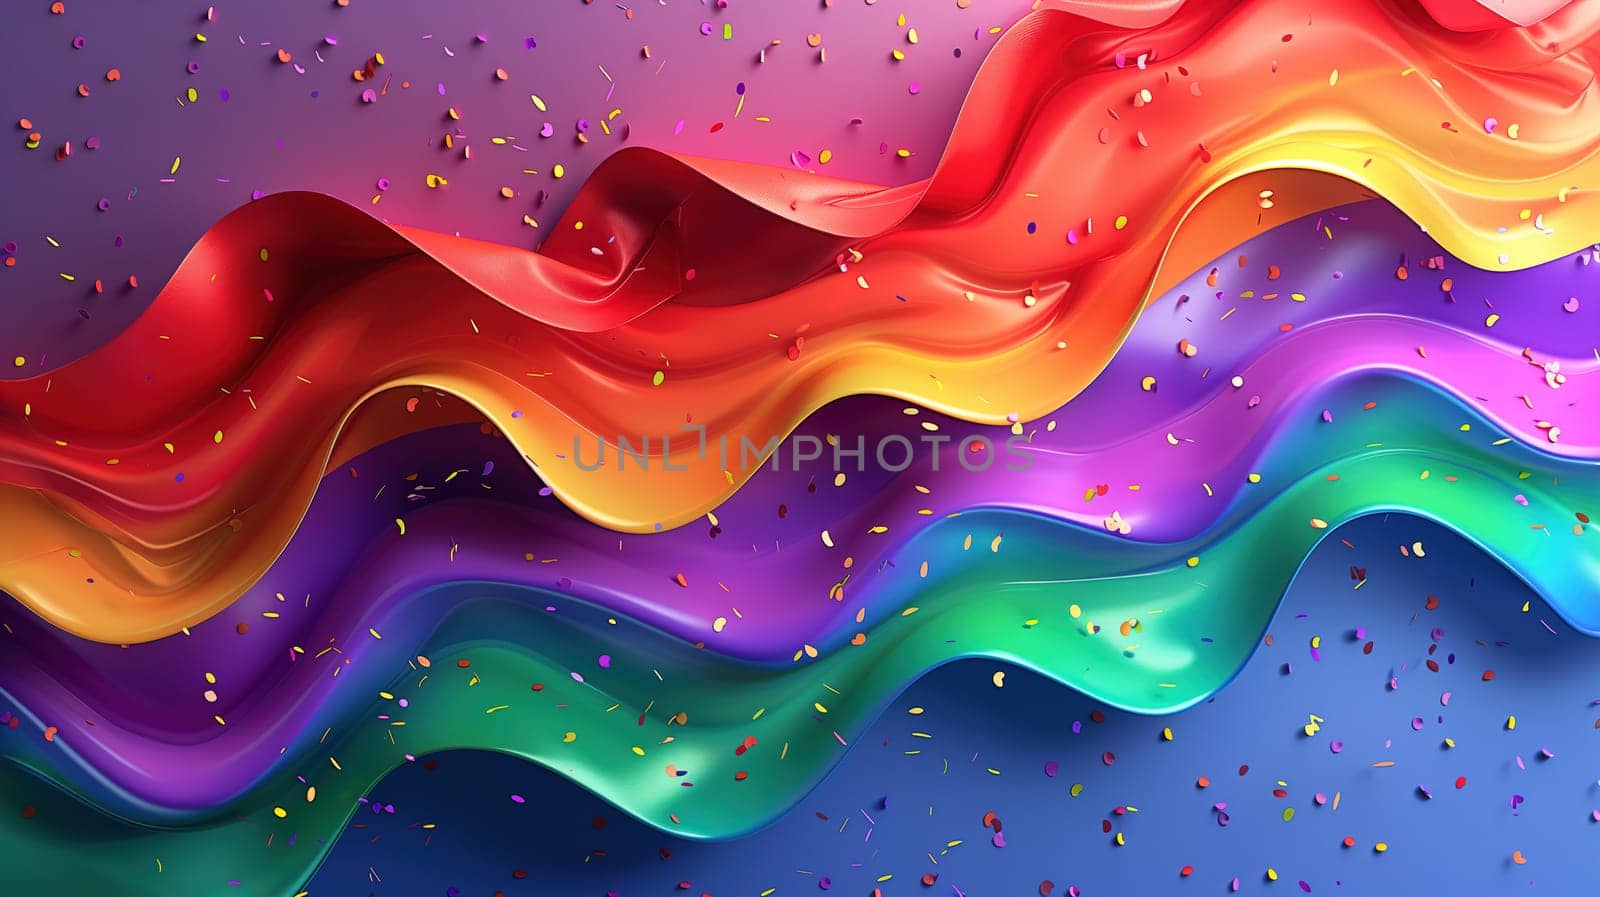 A dynamic display of the rainbow flag, symbolizing LGBT pride, ripples with its iconic spectrum of colors. It creates an atmosphere of inclusivity and celebration, and the sprinkles of confetti enhance the festive mood of unity and diversity.